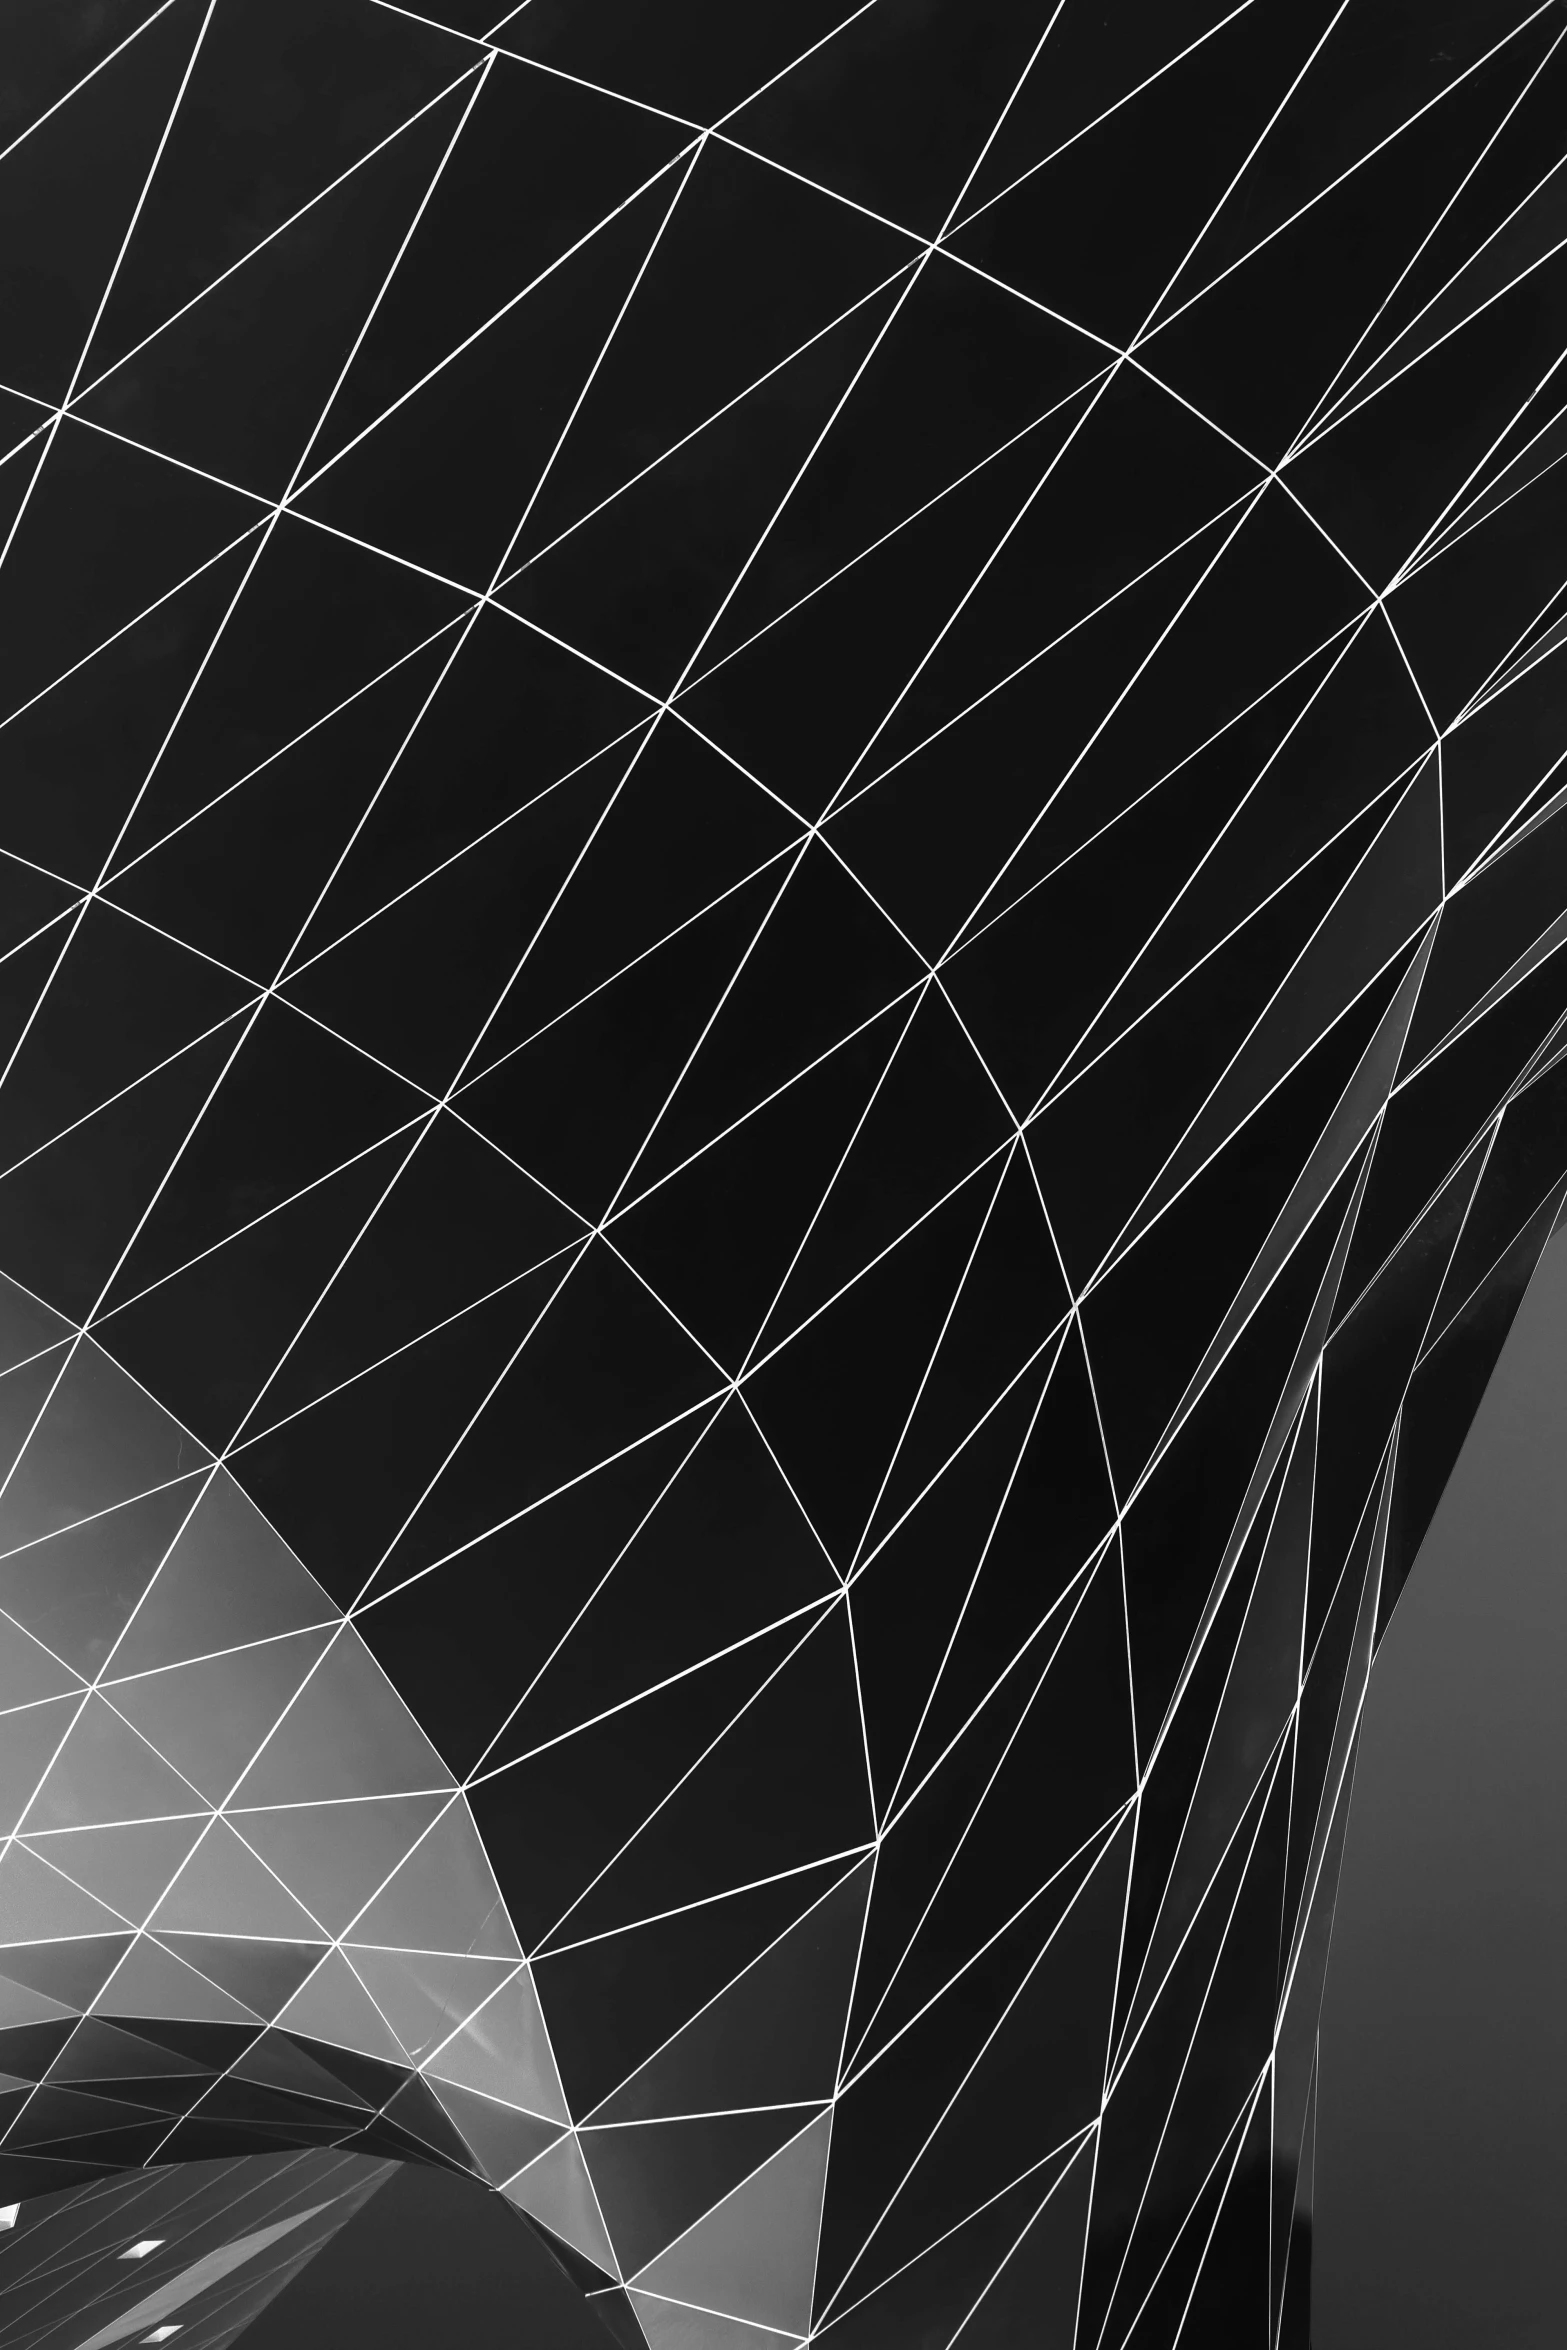 a black and white photo of a building, a raytraced image, inspired by Gao Cen, cyber security polygon, black wired cables, gradient and patterns wallpaper, dynamic folds